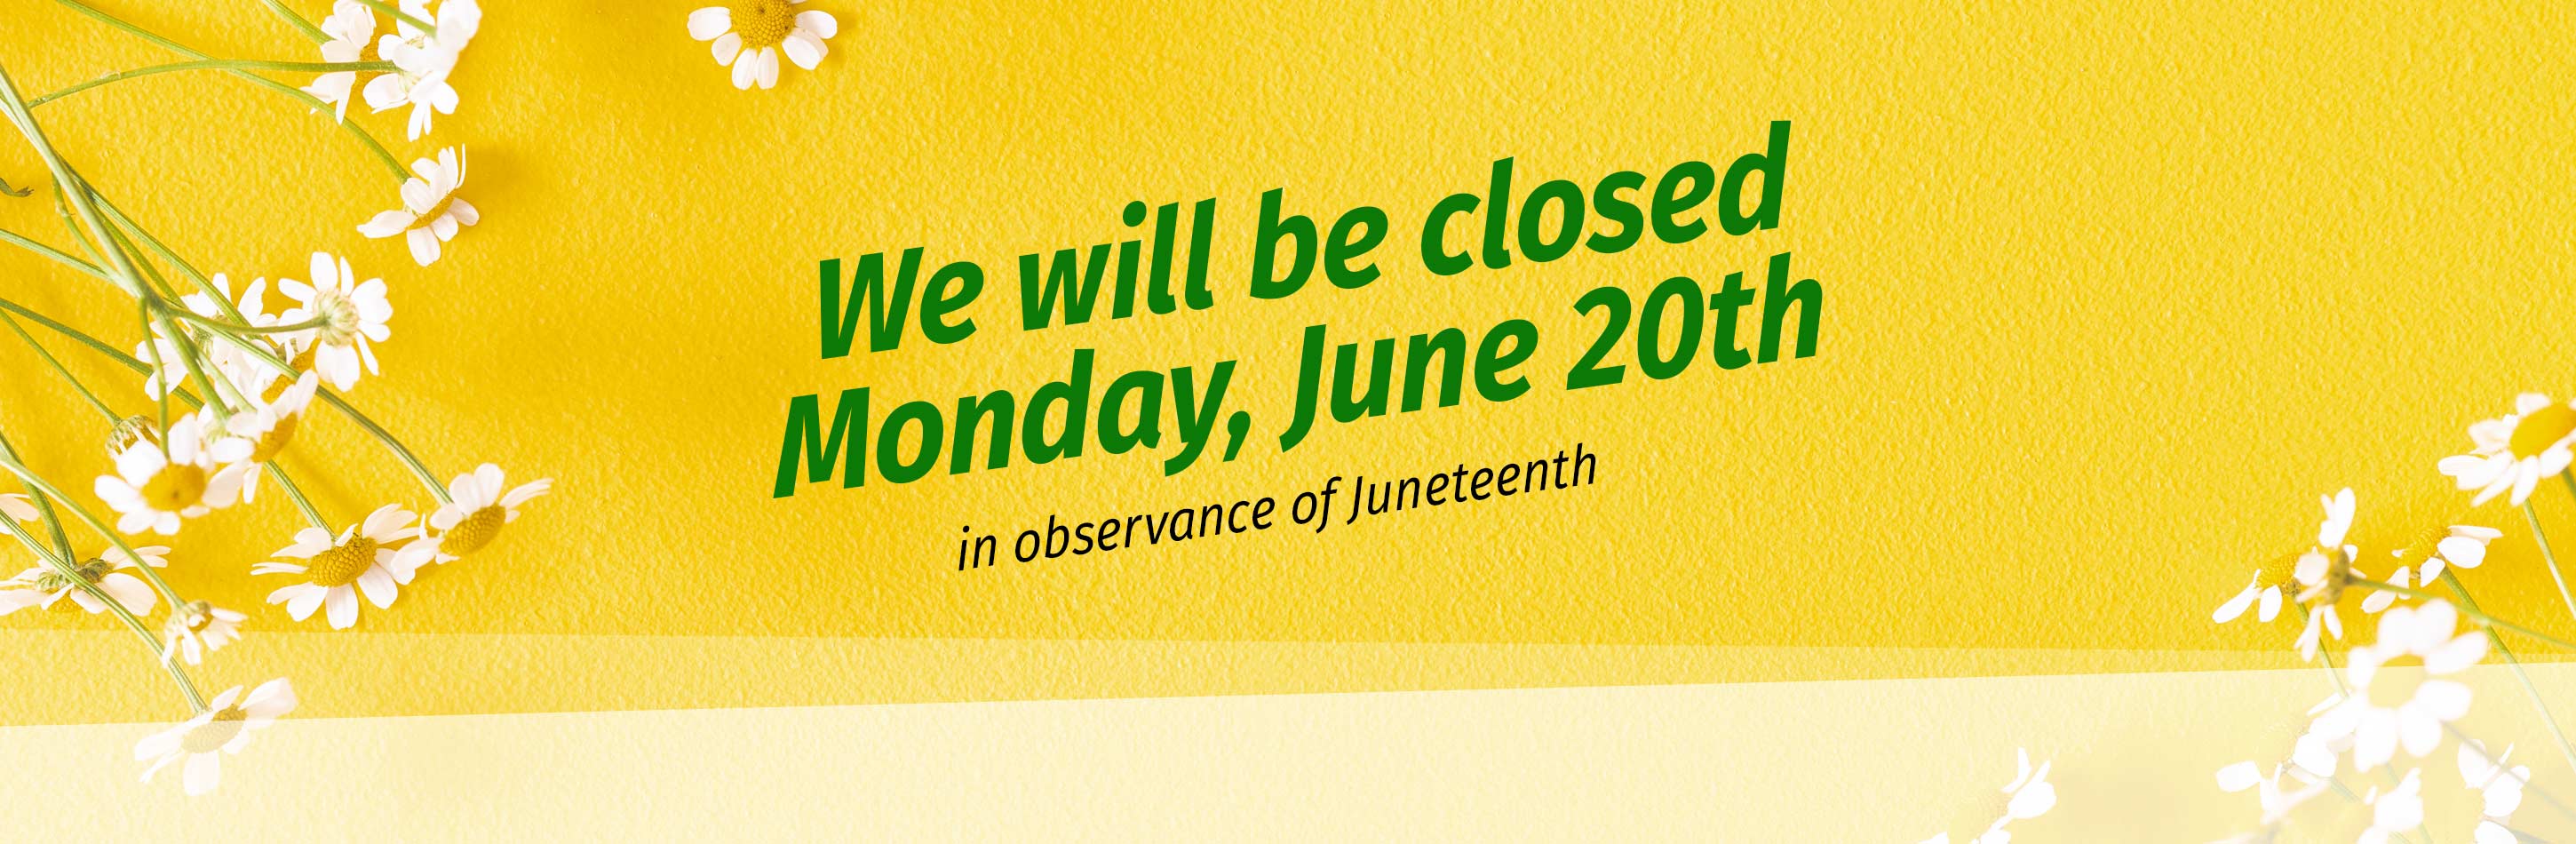 We will be closed Monday, June 20th in observance of Juneteenth